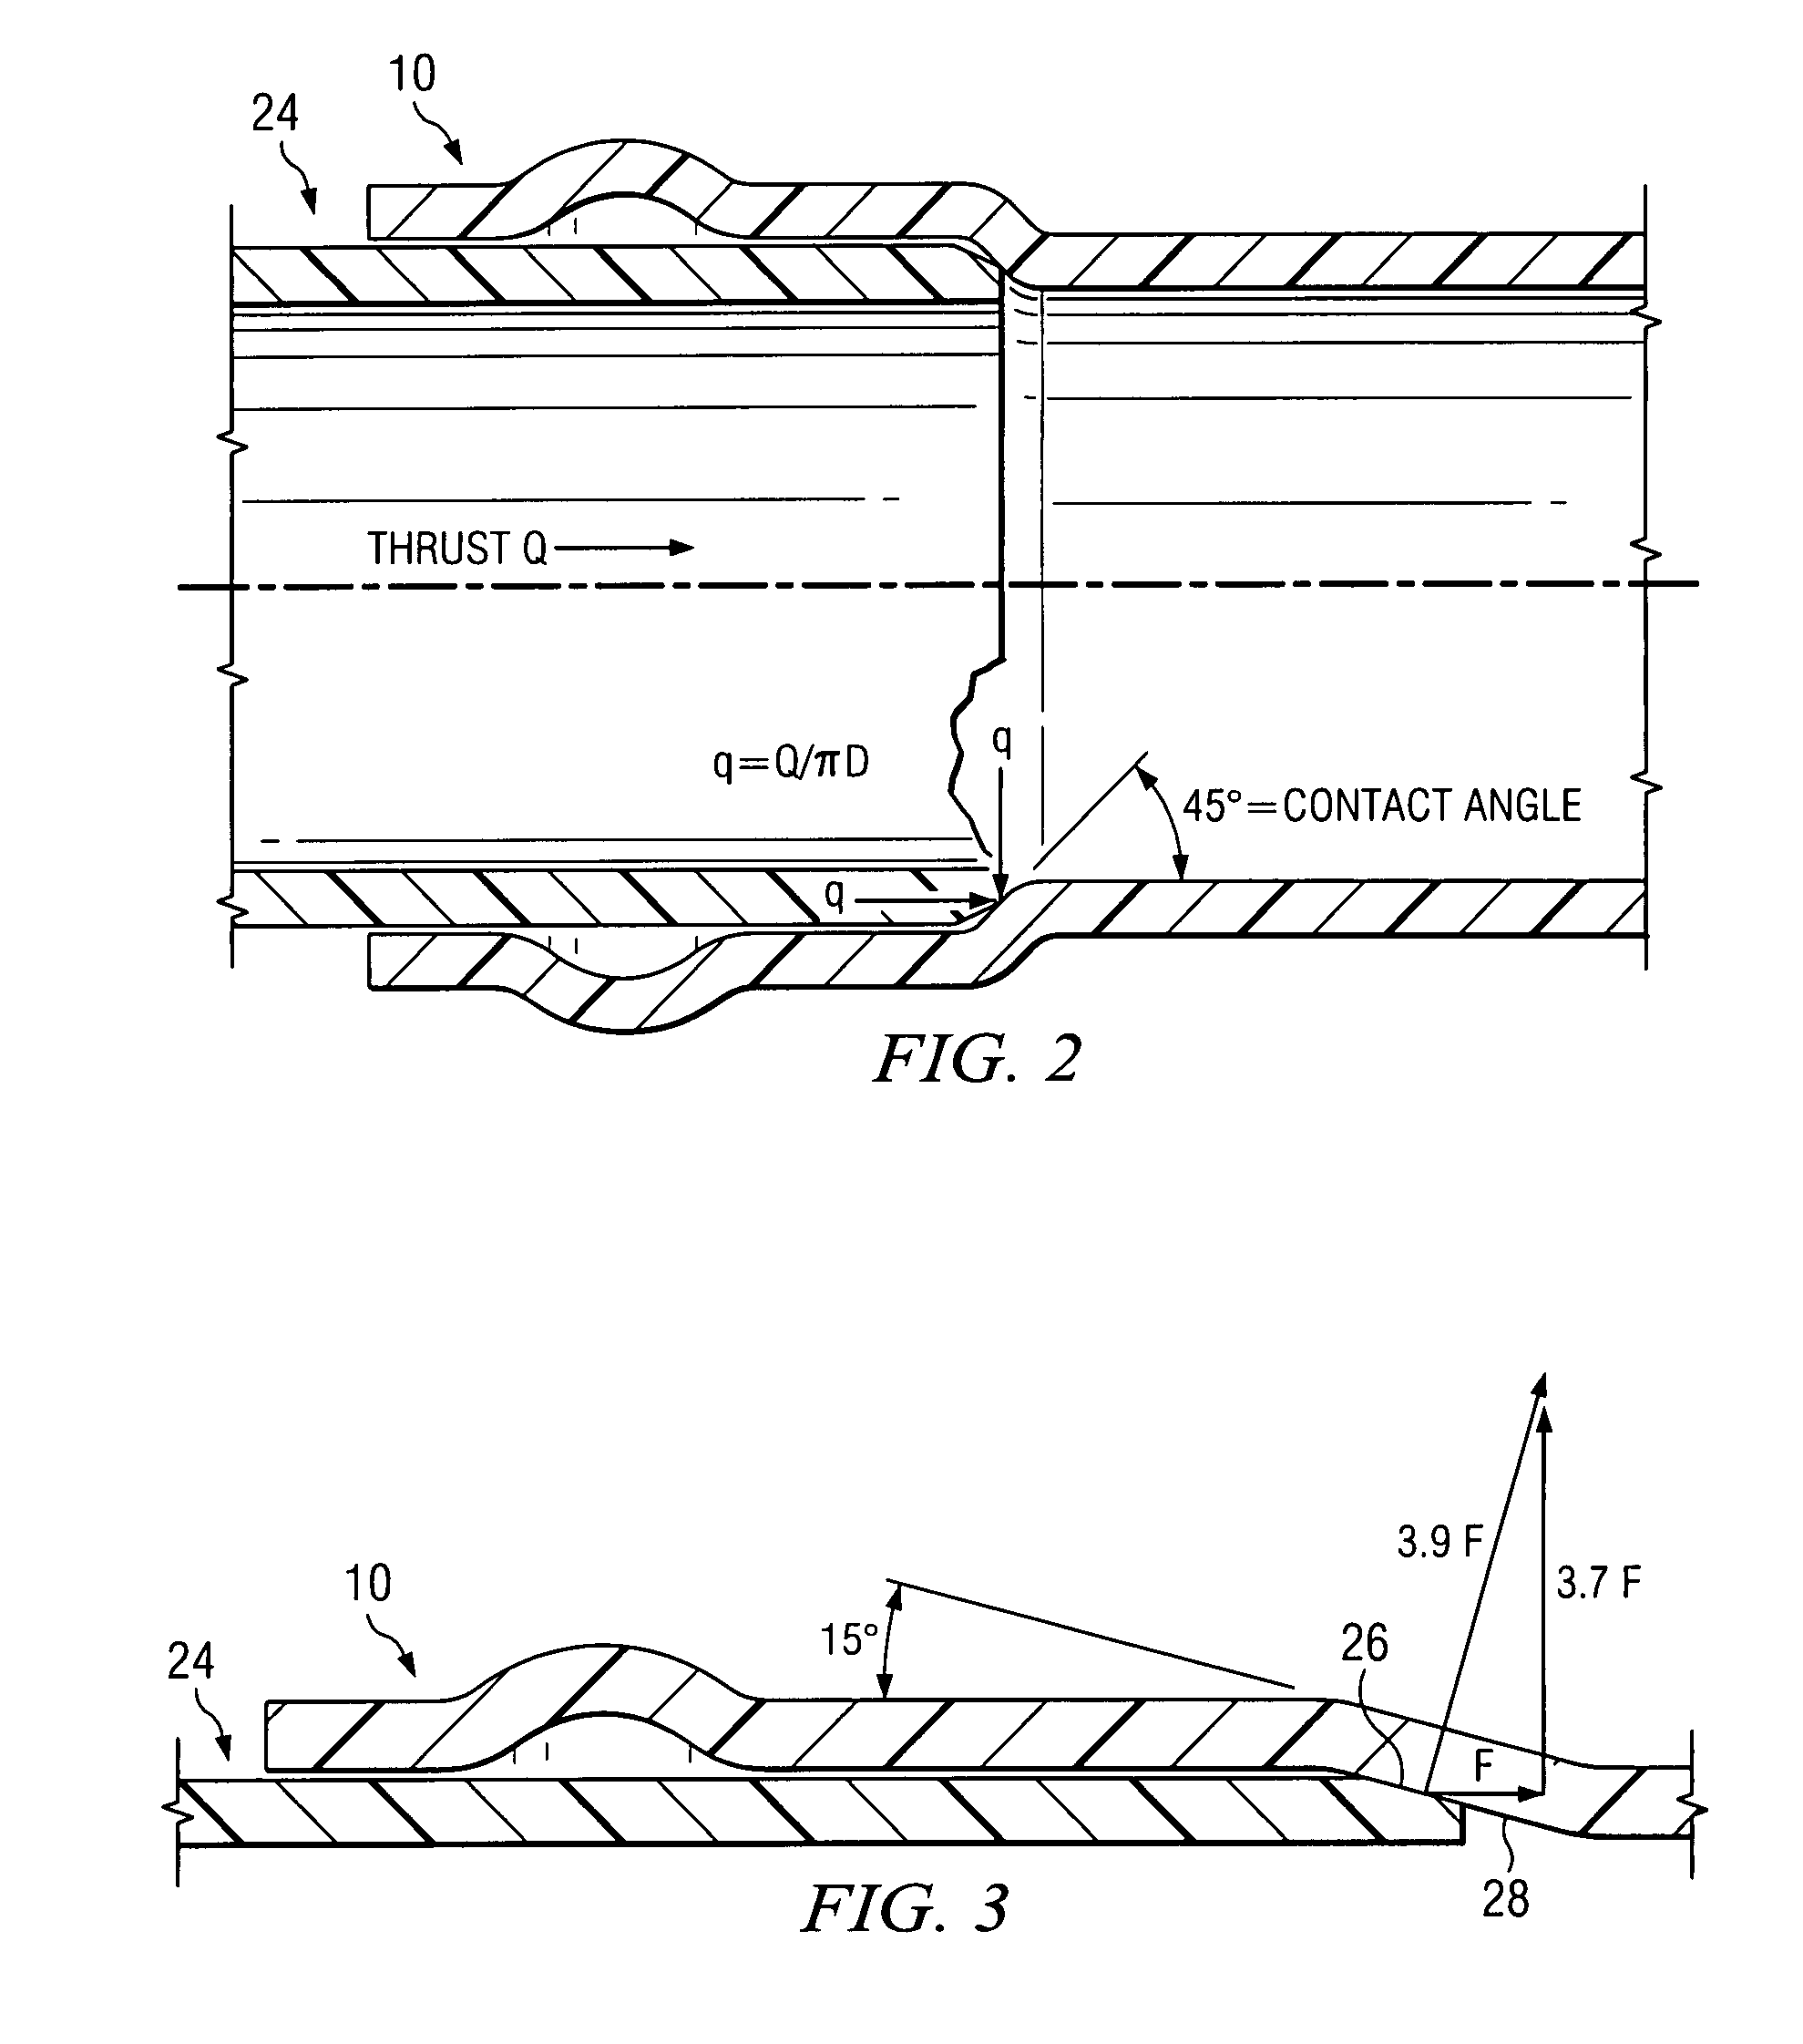 Method and apparatus for preventing overinsertion in plastic pipe systems